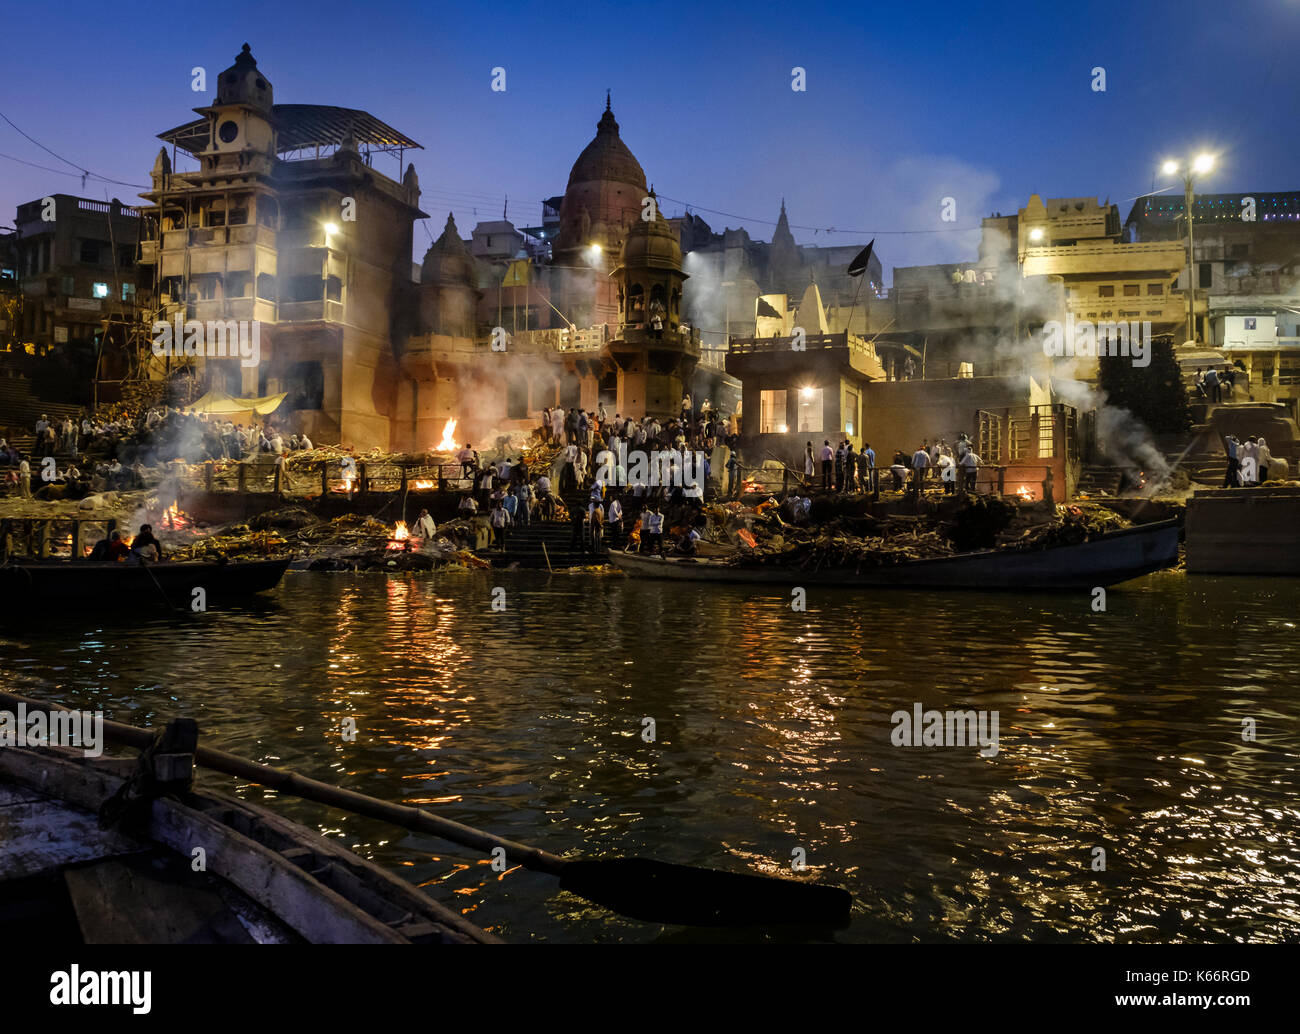 VARANASI, INDIA - CIRCA NOVEMBER 2016: Cremation in progess at the Manikarnika Ghat. This is is one of the oldest ghats in Varanasi, and most known fo Stock Photo